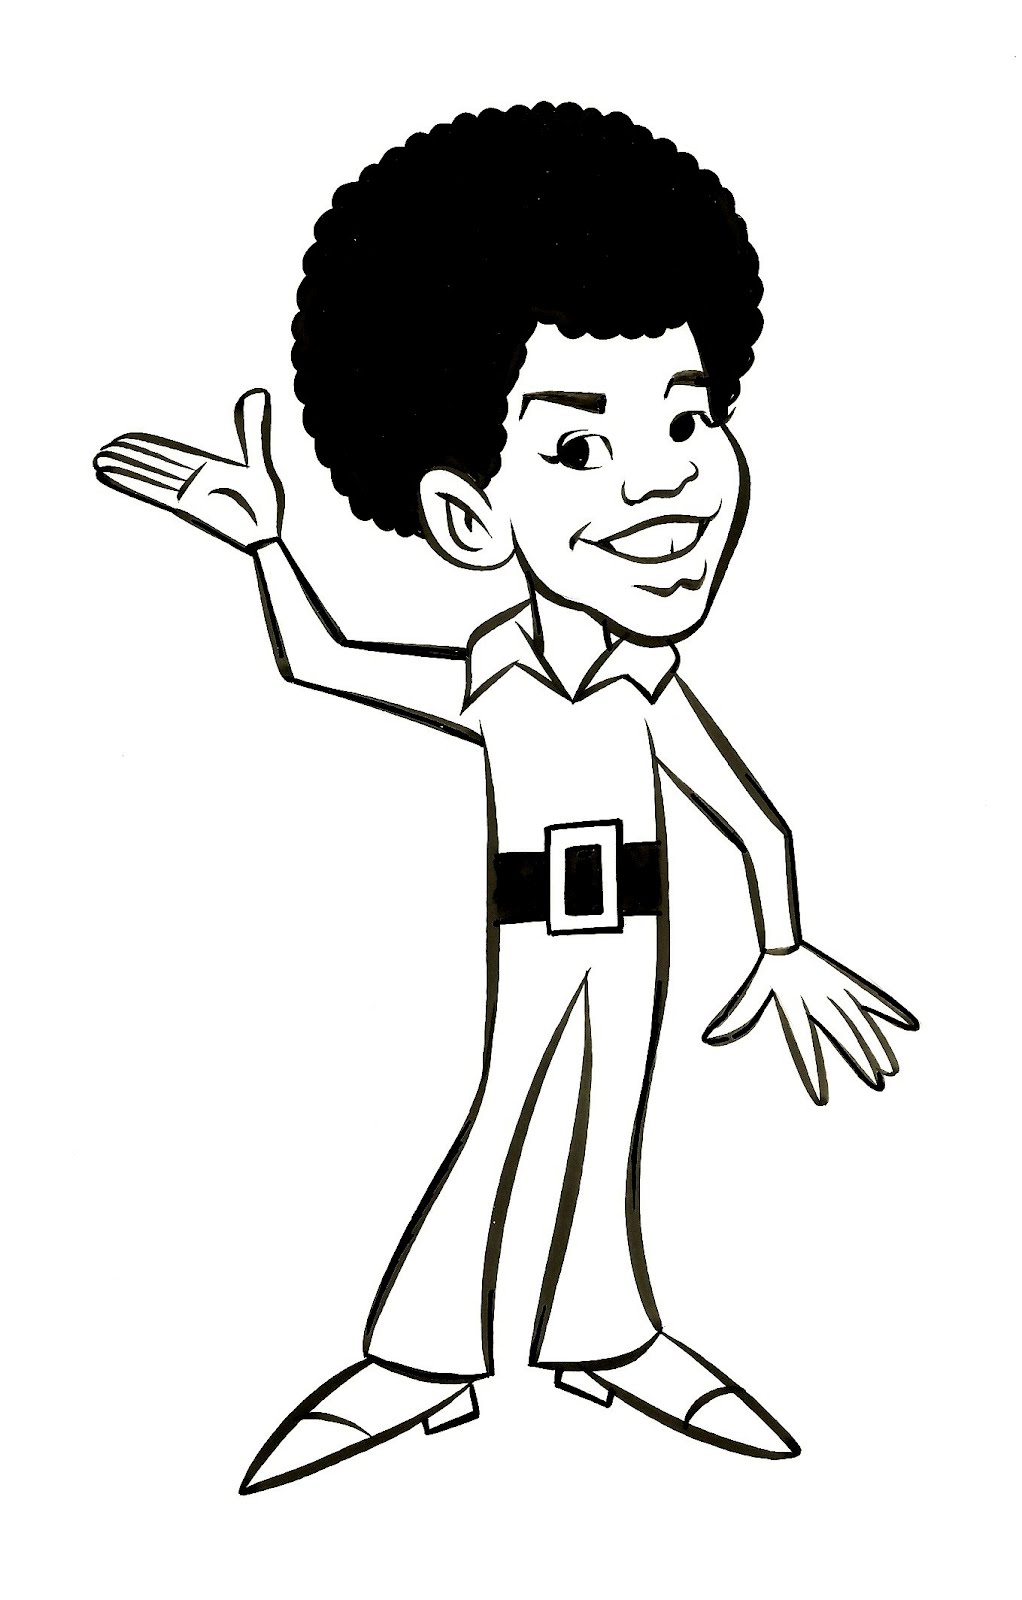 You can print or color them online at getdrawings.com for absolutely free. Michael Jackson Coloring Pages